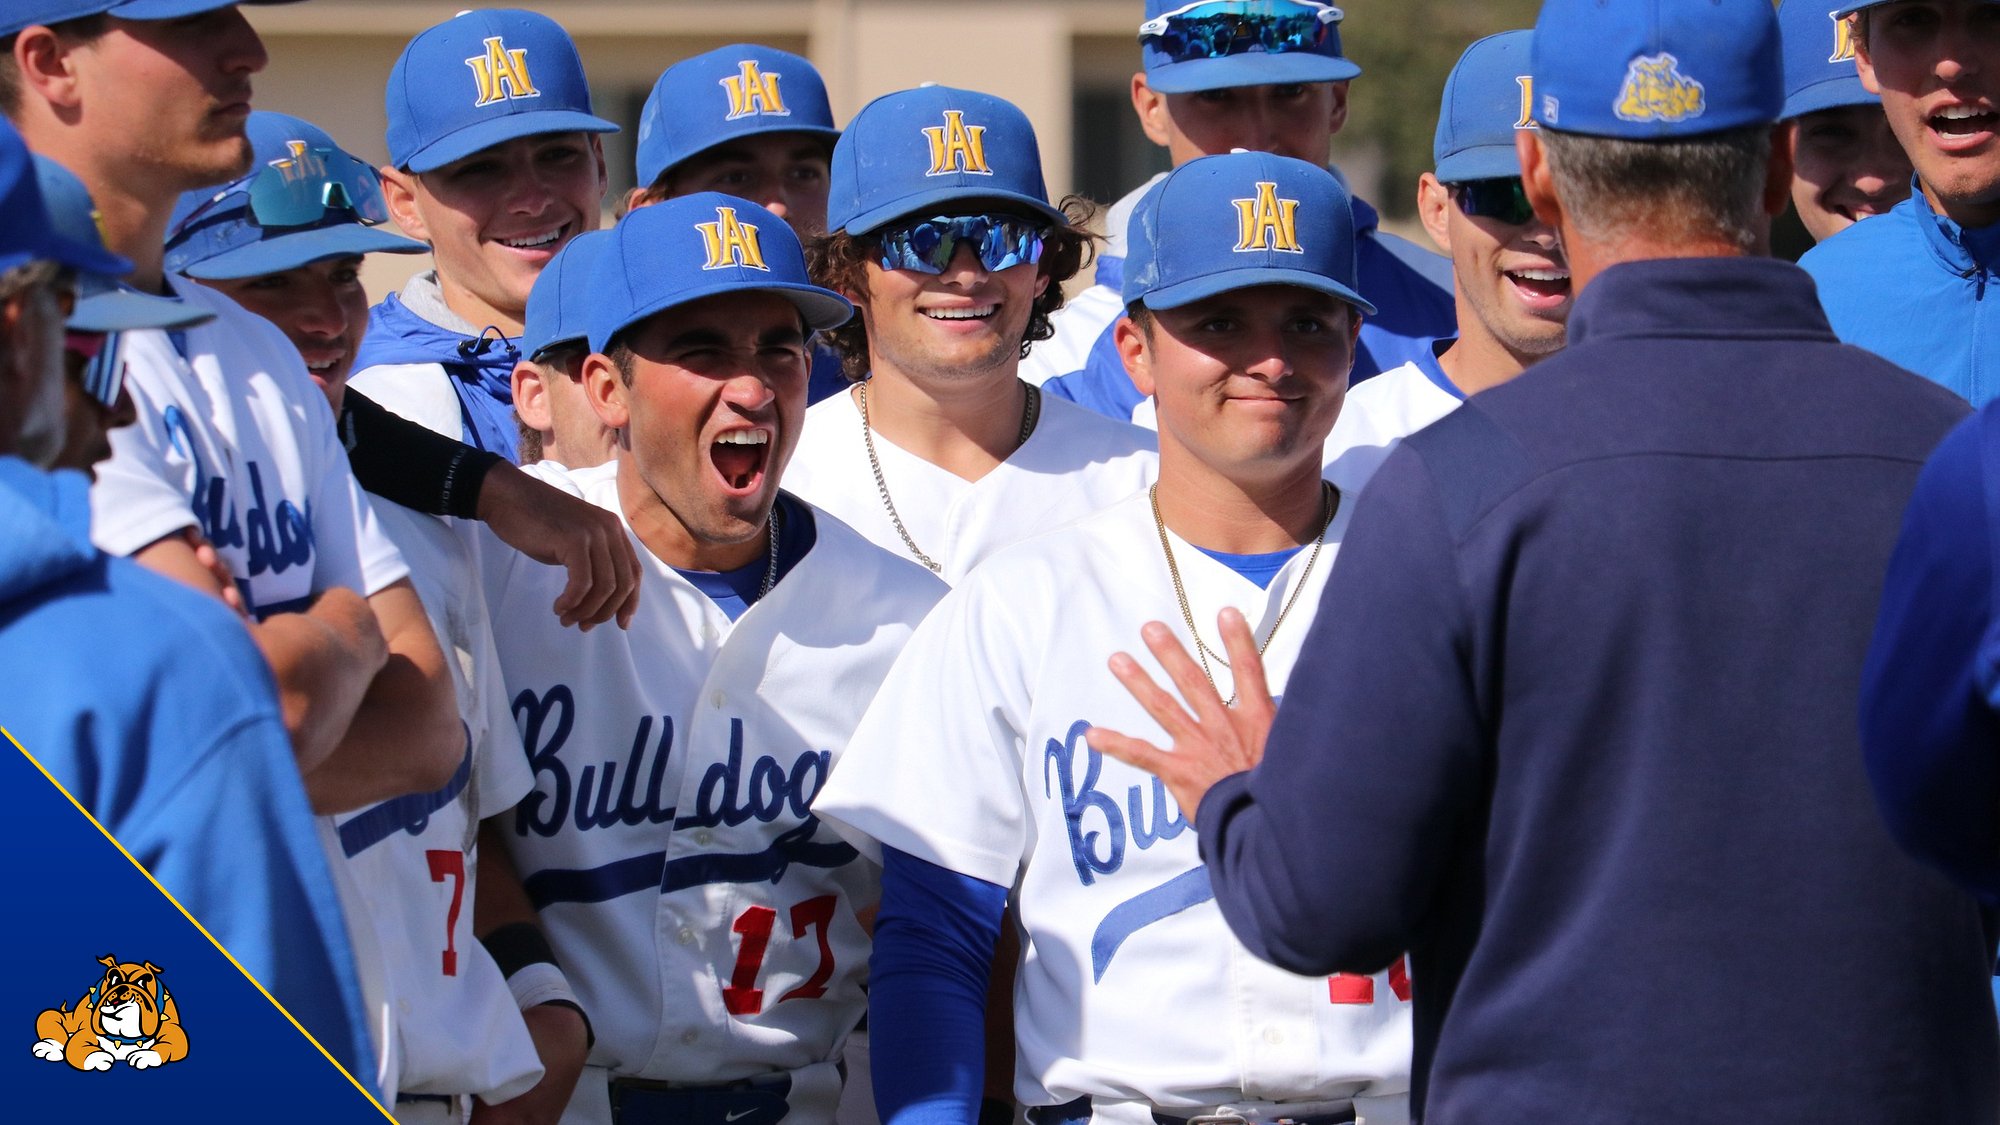 Bulldogs Take Series over Santa Barbara After Two Weekend Wins